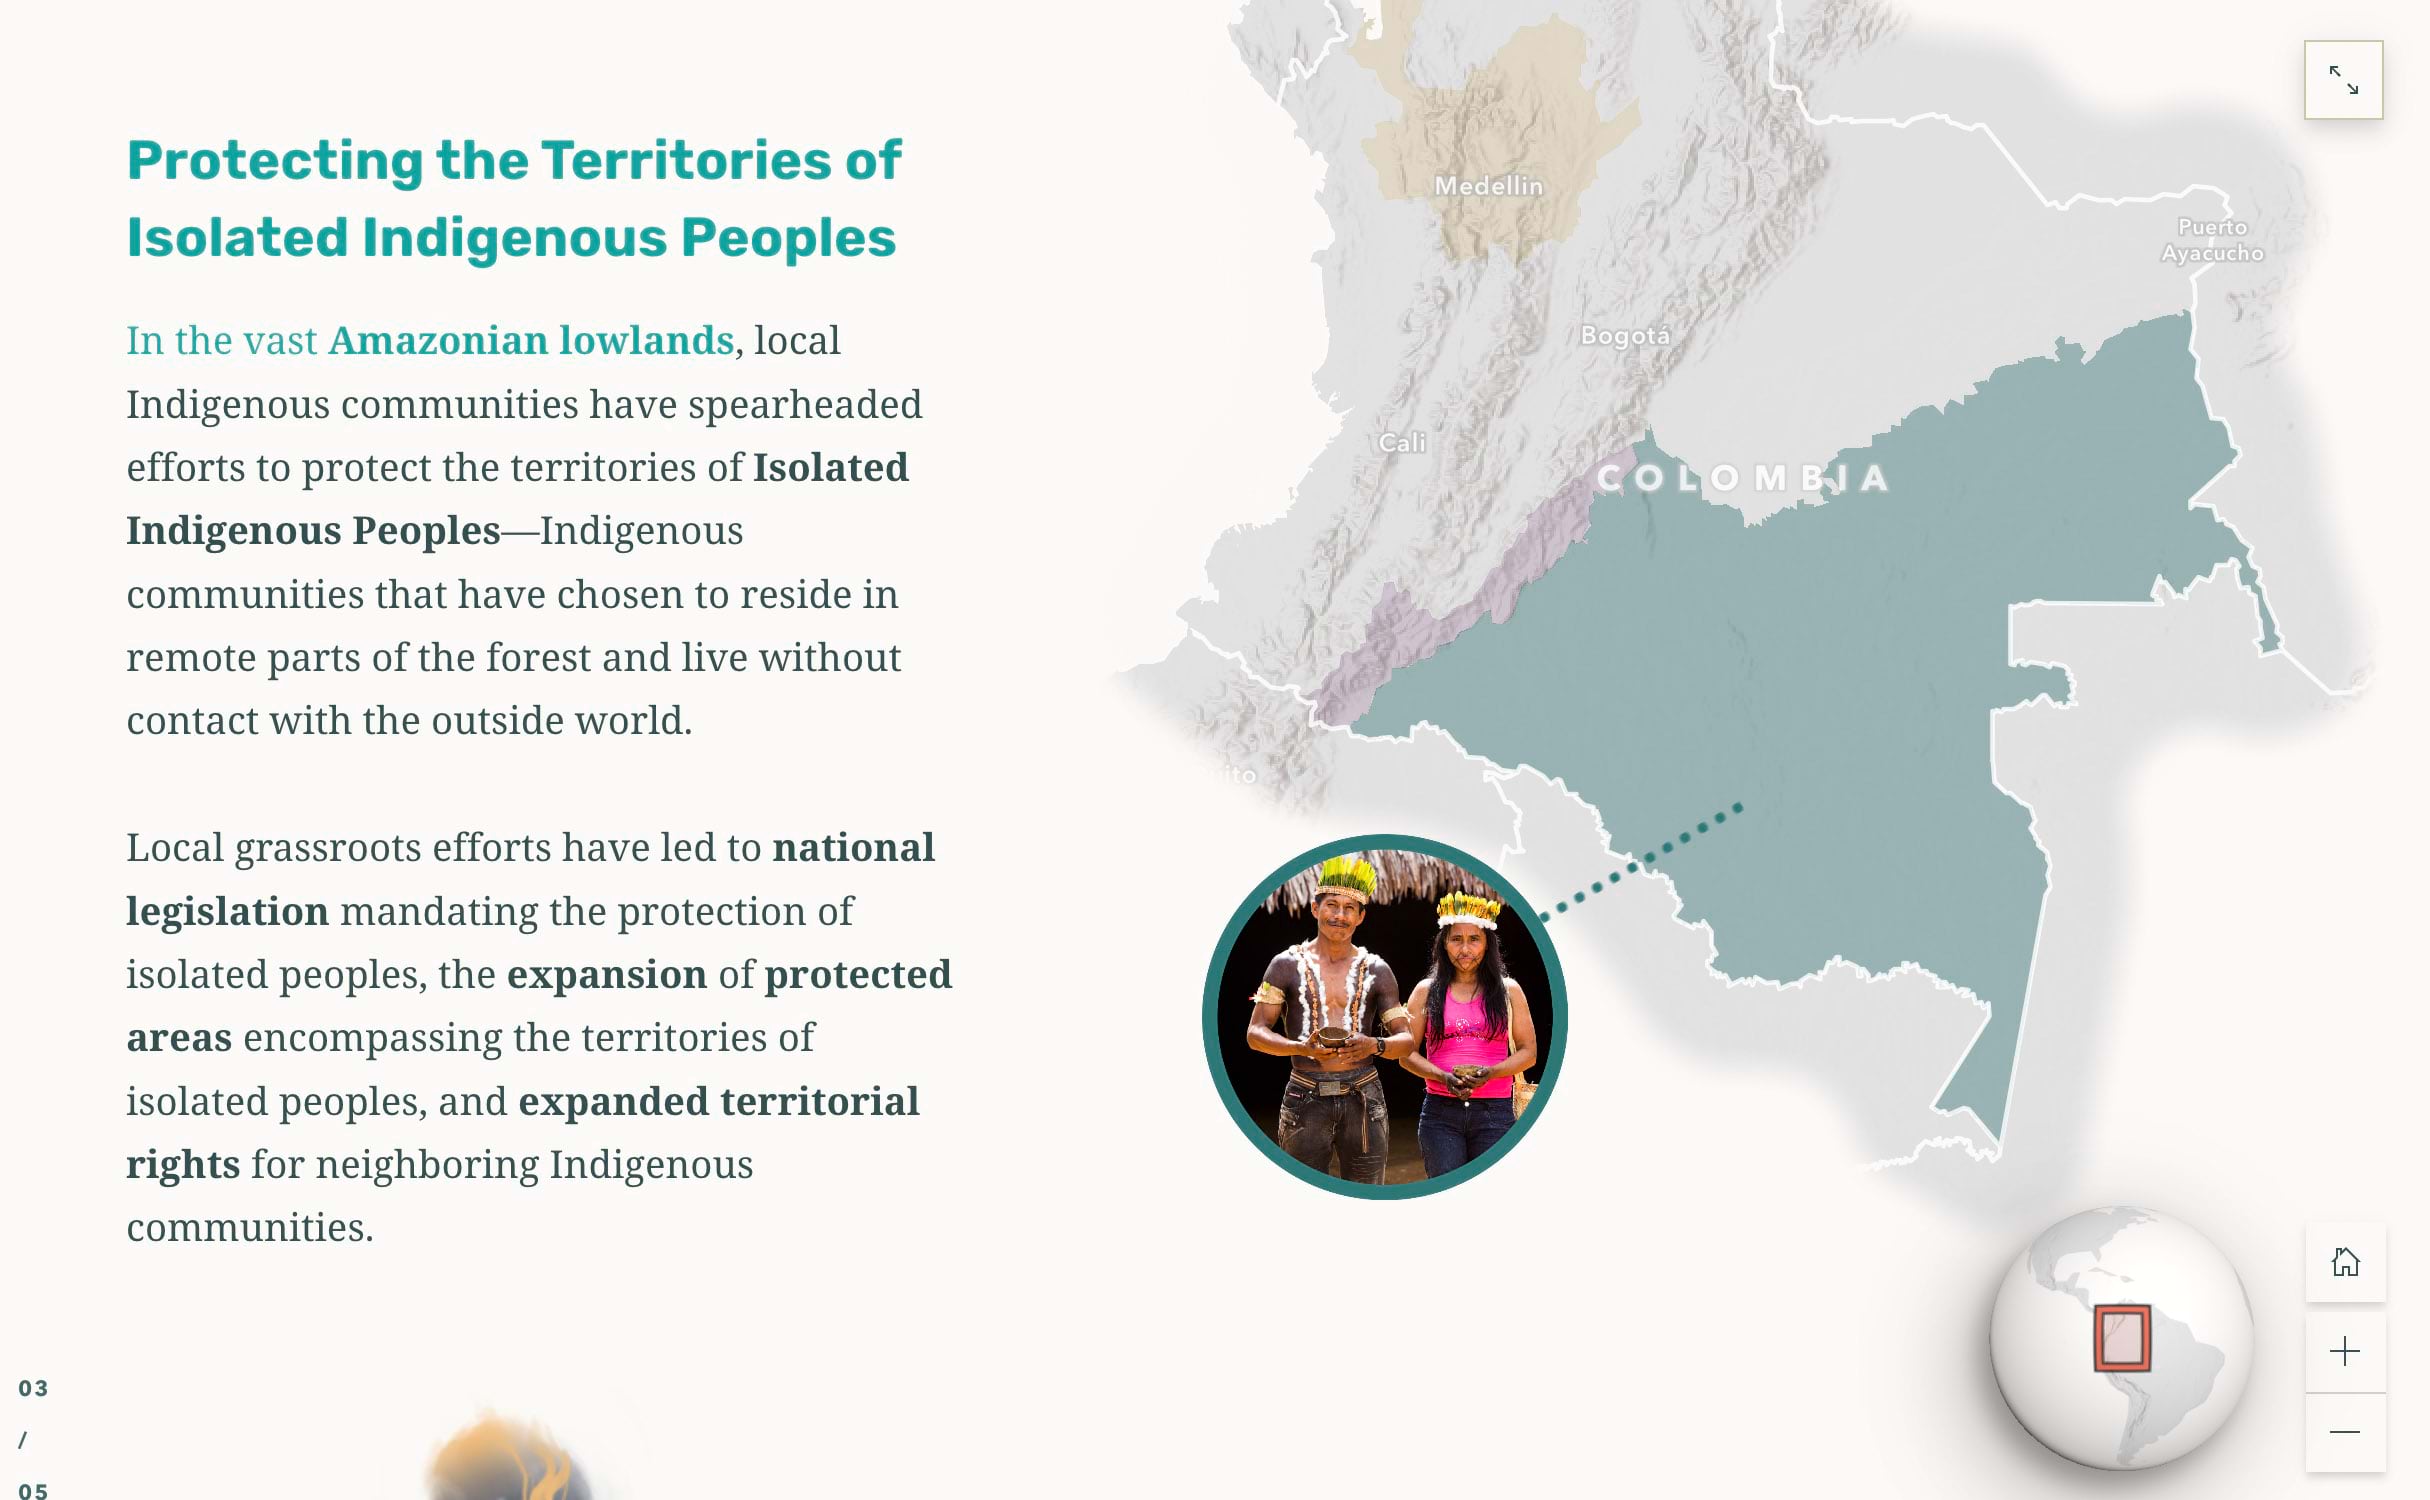 Screen shot of a Living Territories story immersive section with text on the left and graphics and a map on the right